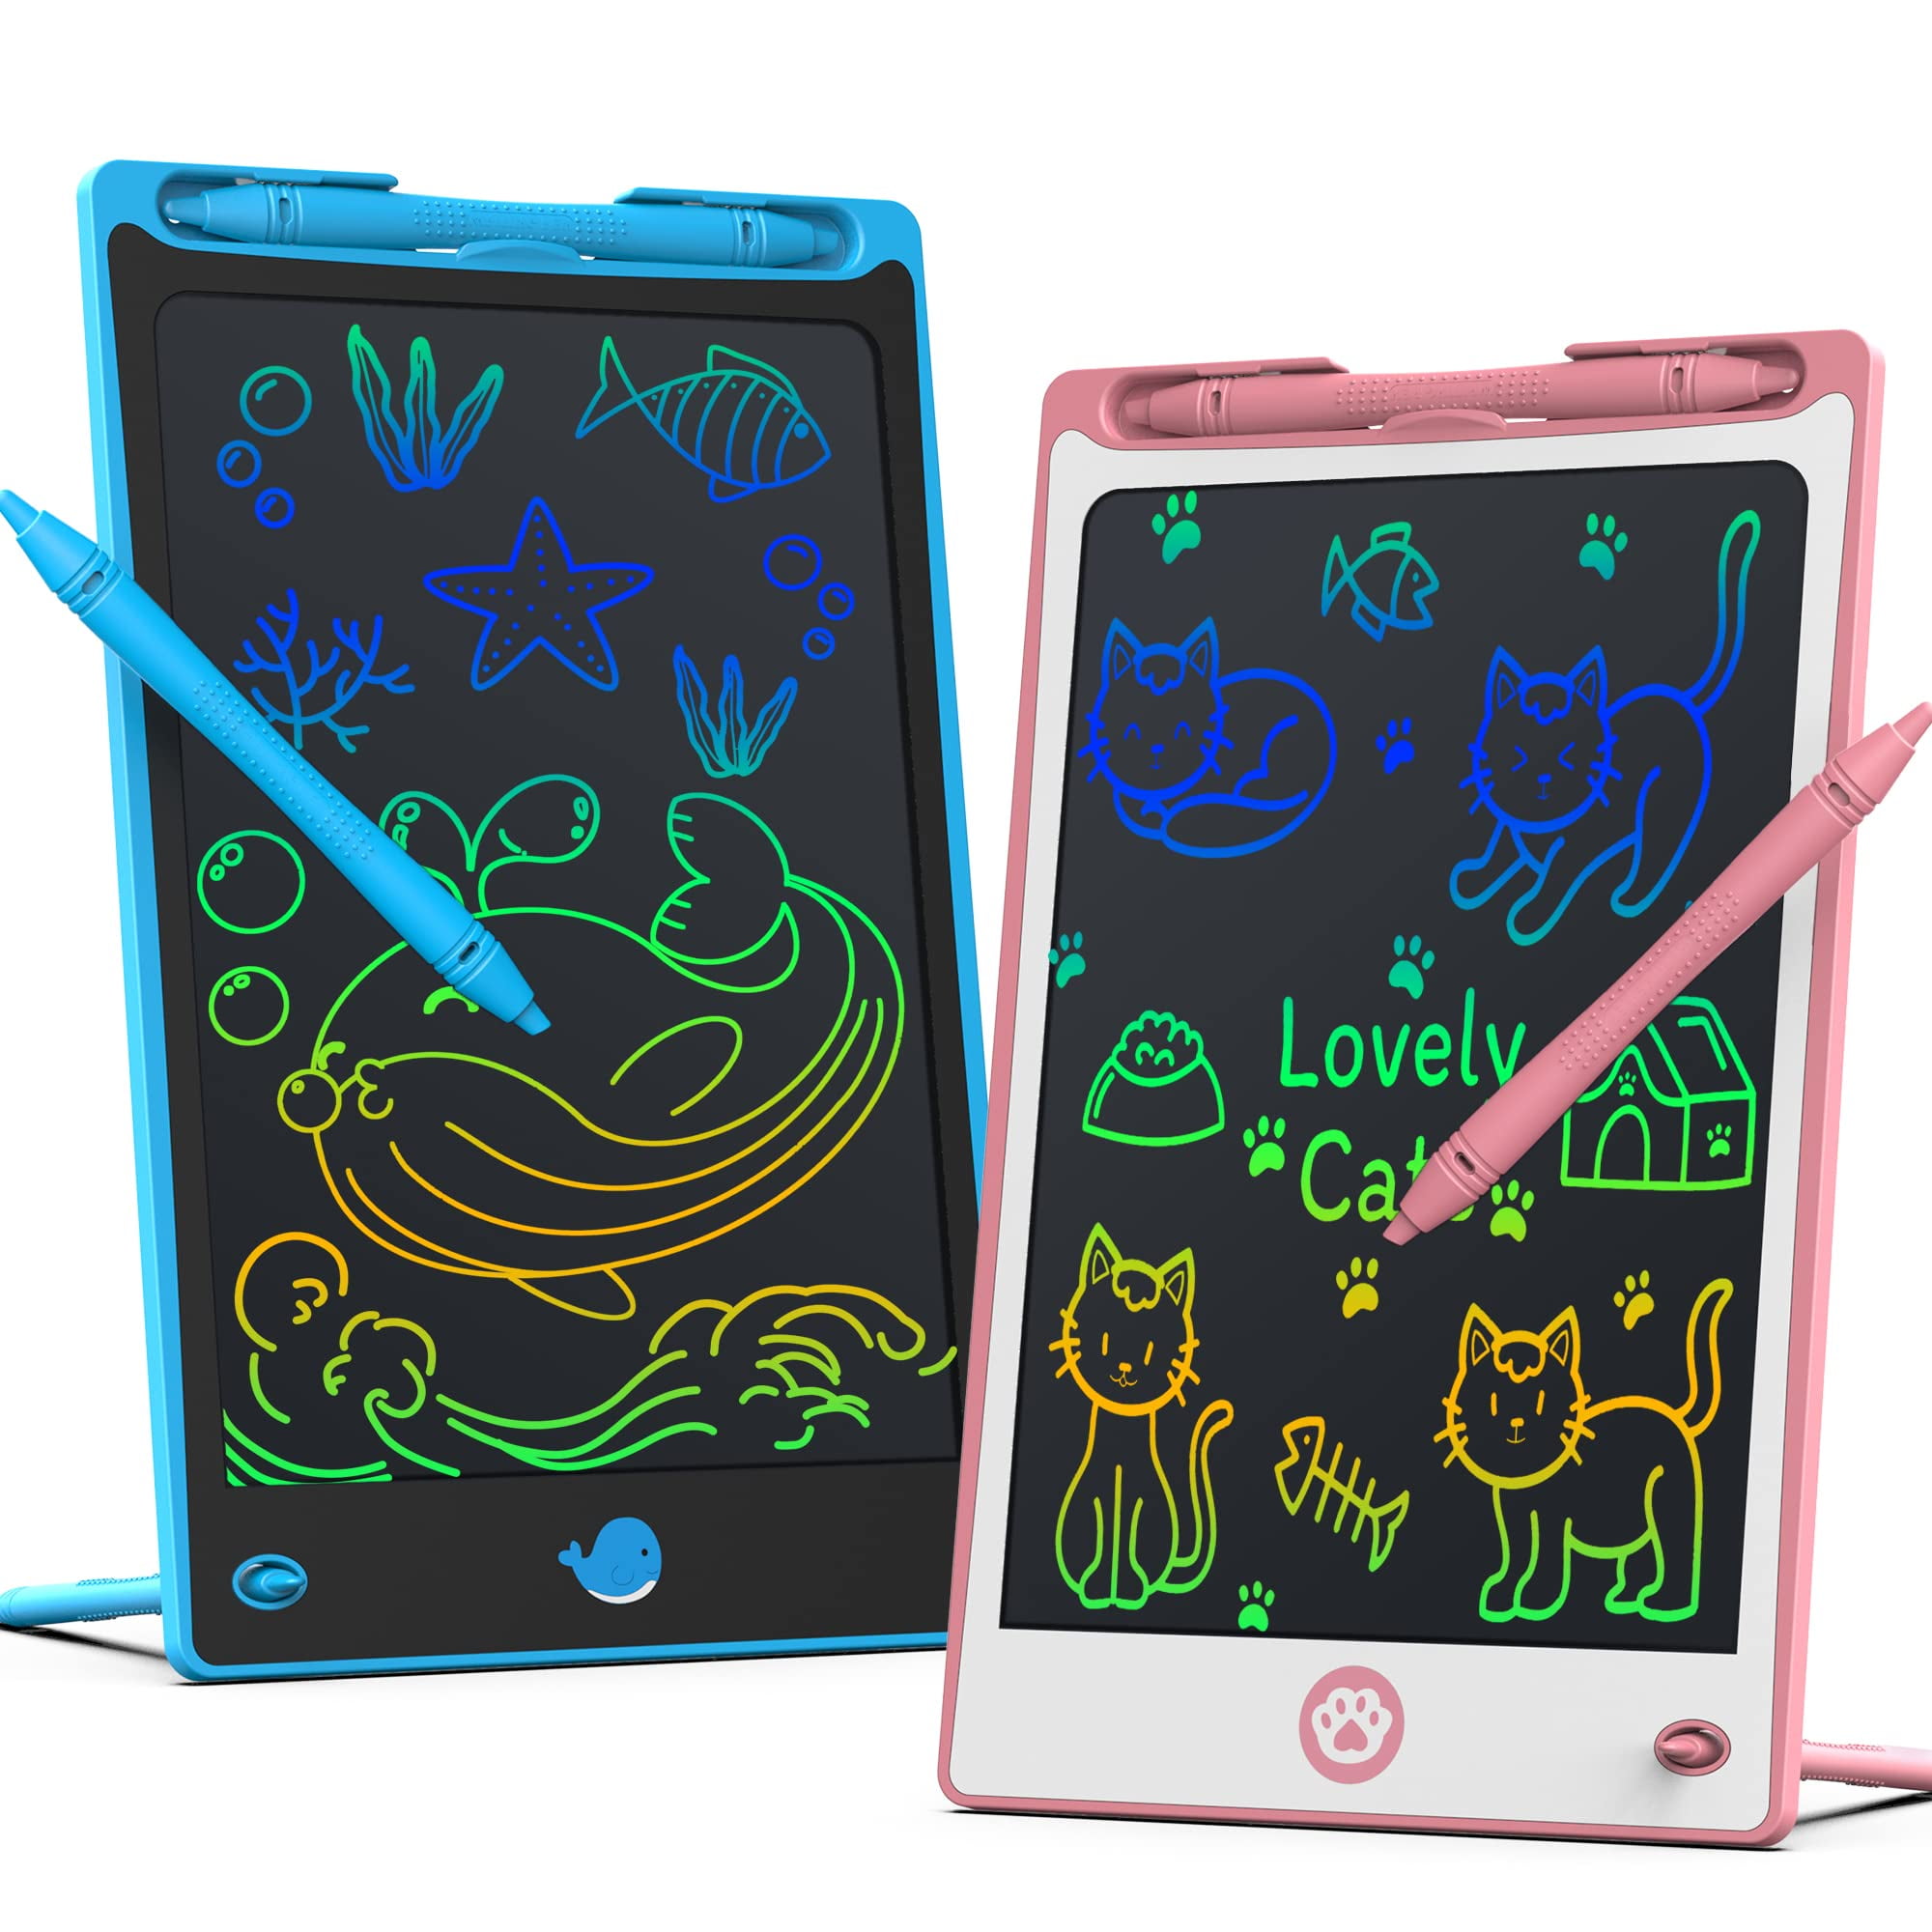 LCD Writing Tablet for Kids, 10 Inch Colorful Toddler Doodle Board Drawing  Pads, Educational Learning Toys for Age 2-3 2-4 3-5 3 4 5 6 7 8 9 4-6 6-8